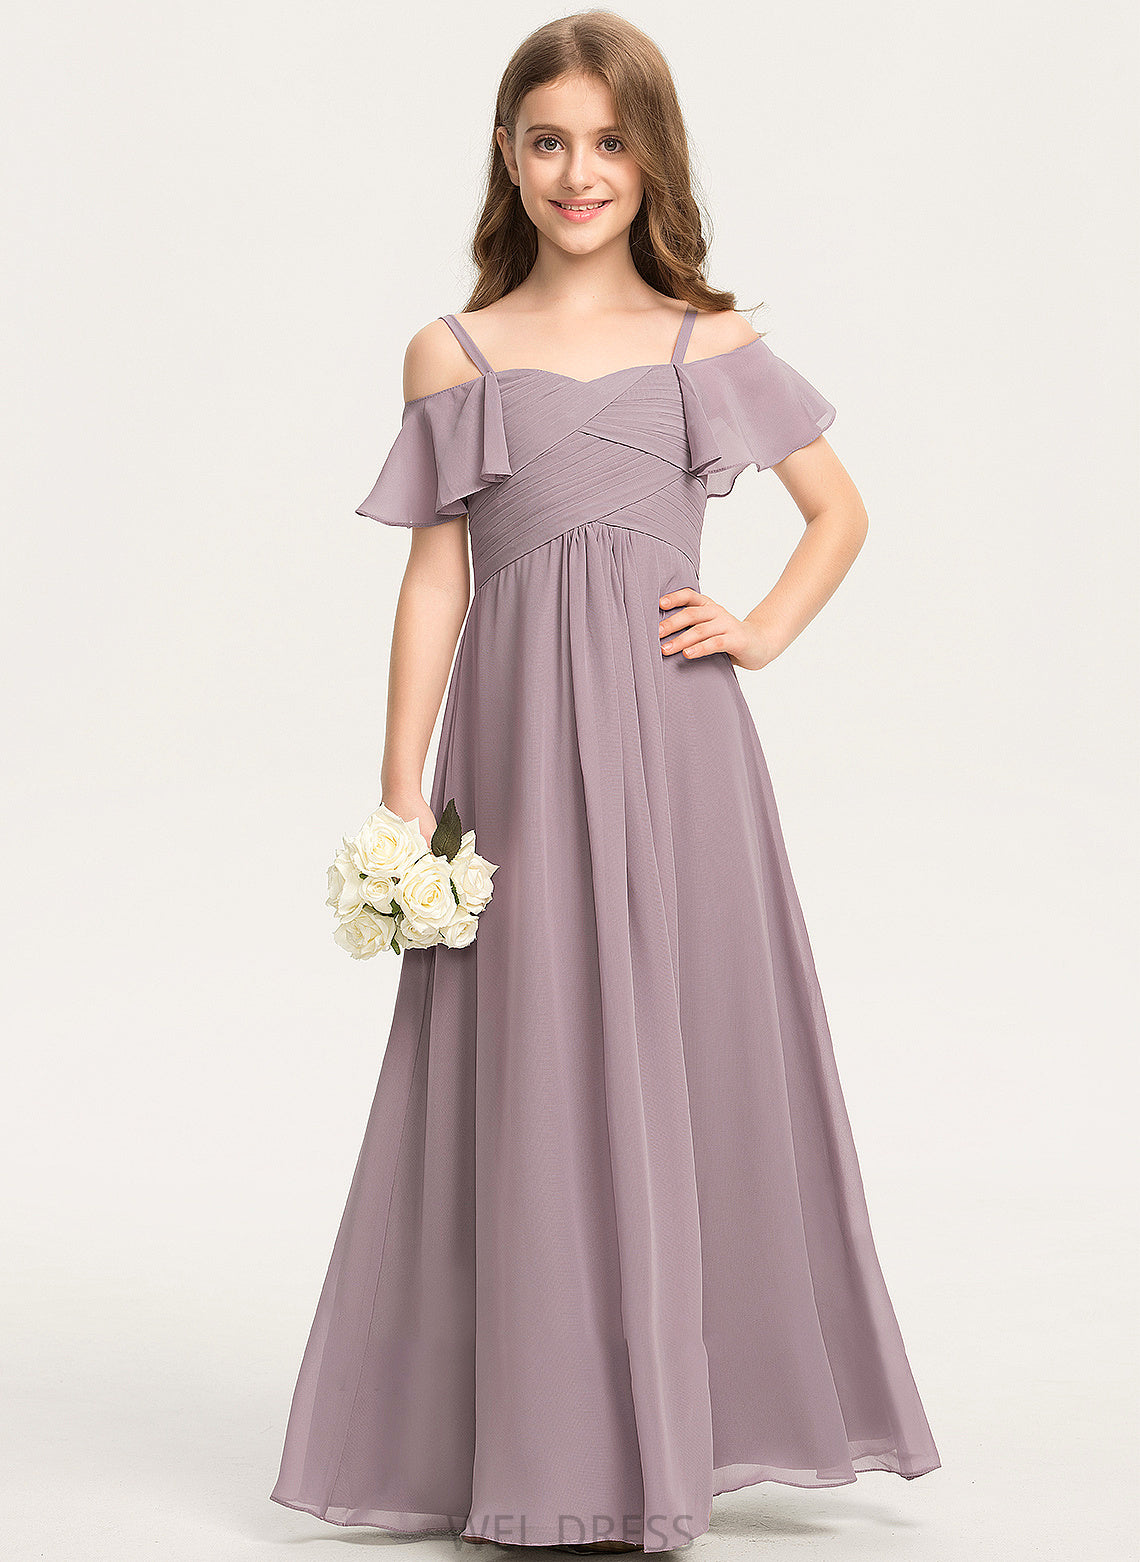 A-Line Junior Bridesmaid Dresses Floor-Length Ruffle With Chiffon Off-the-Shoulder Campbell